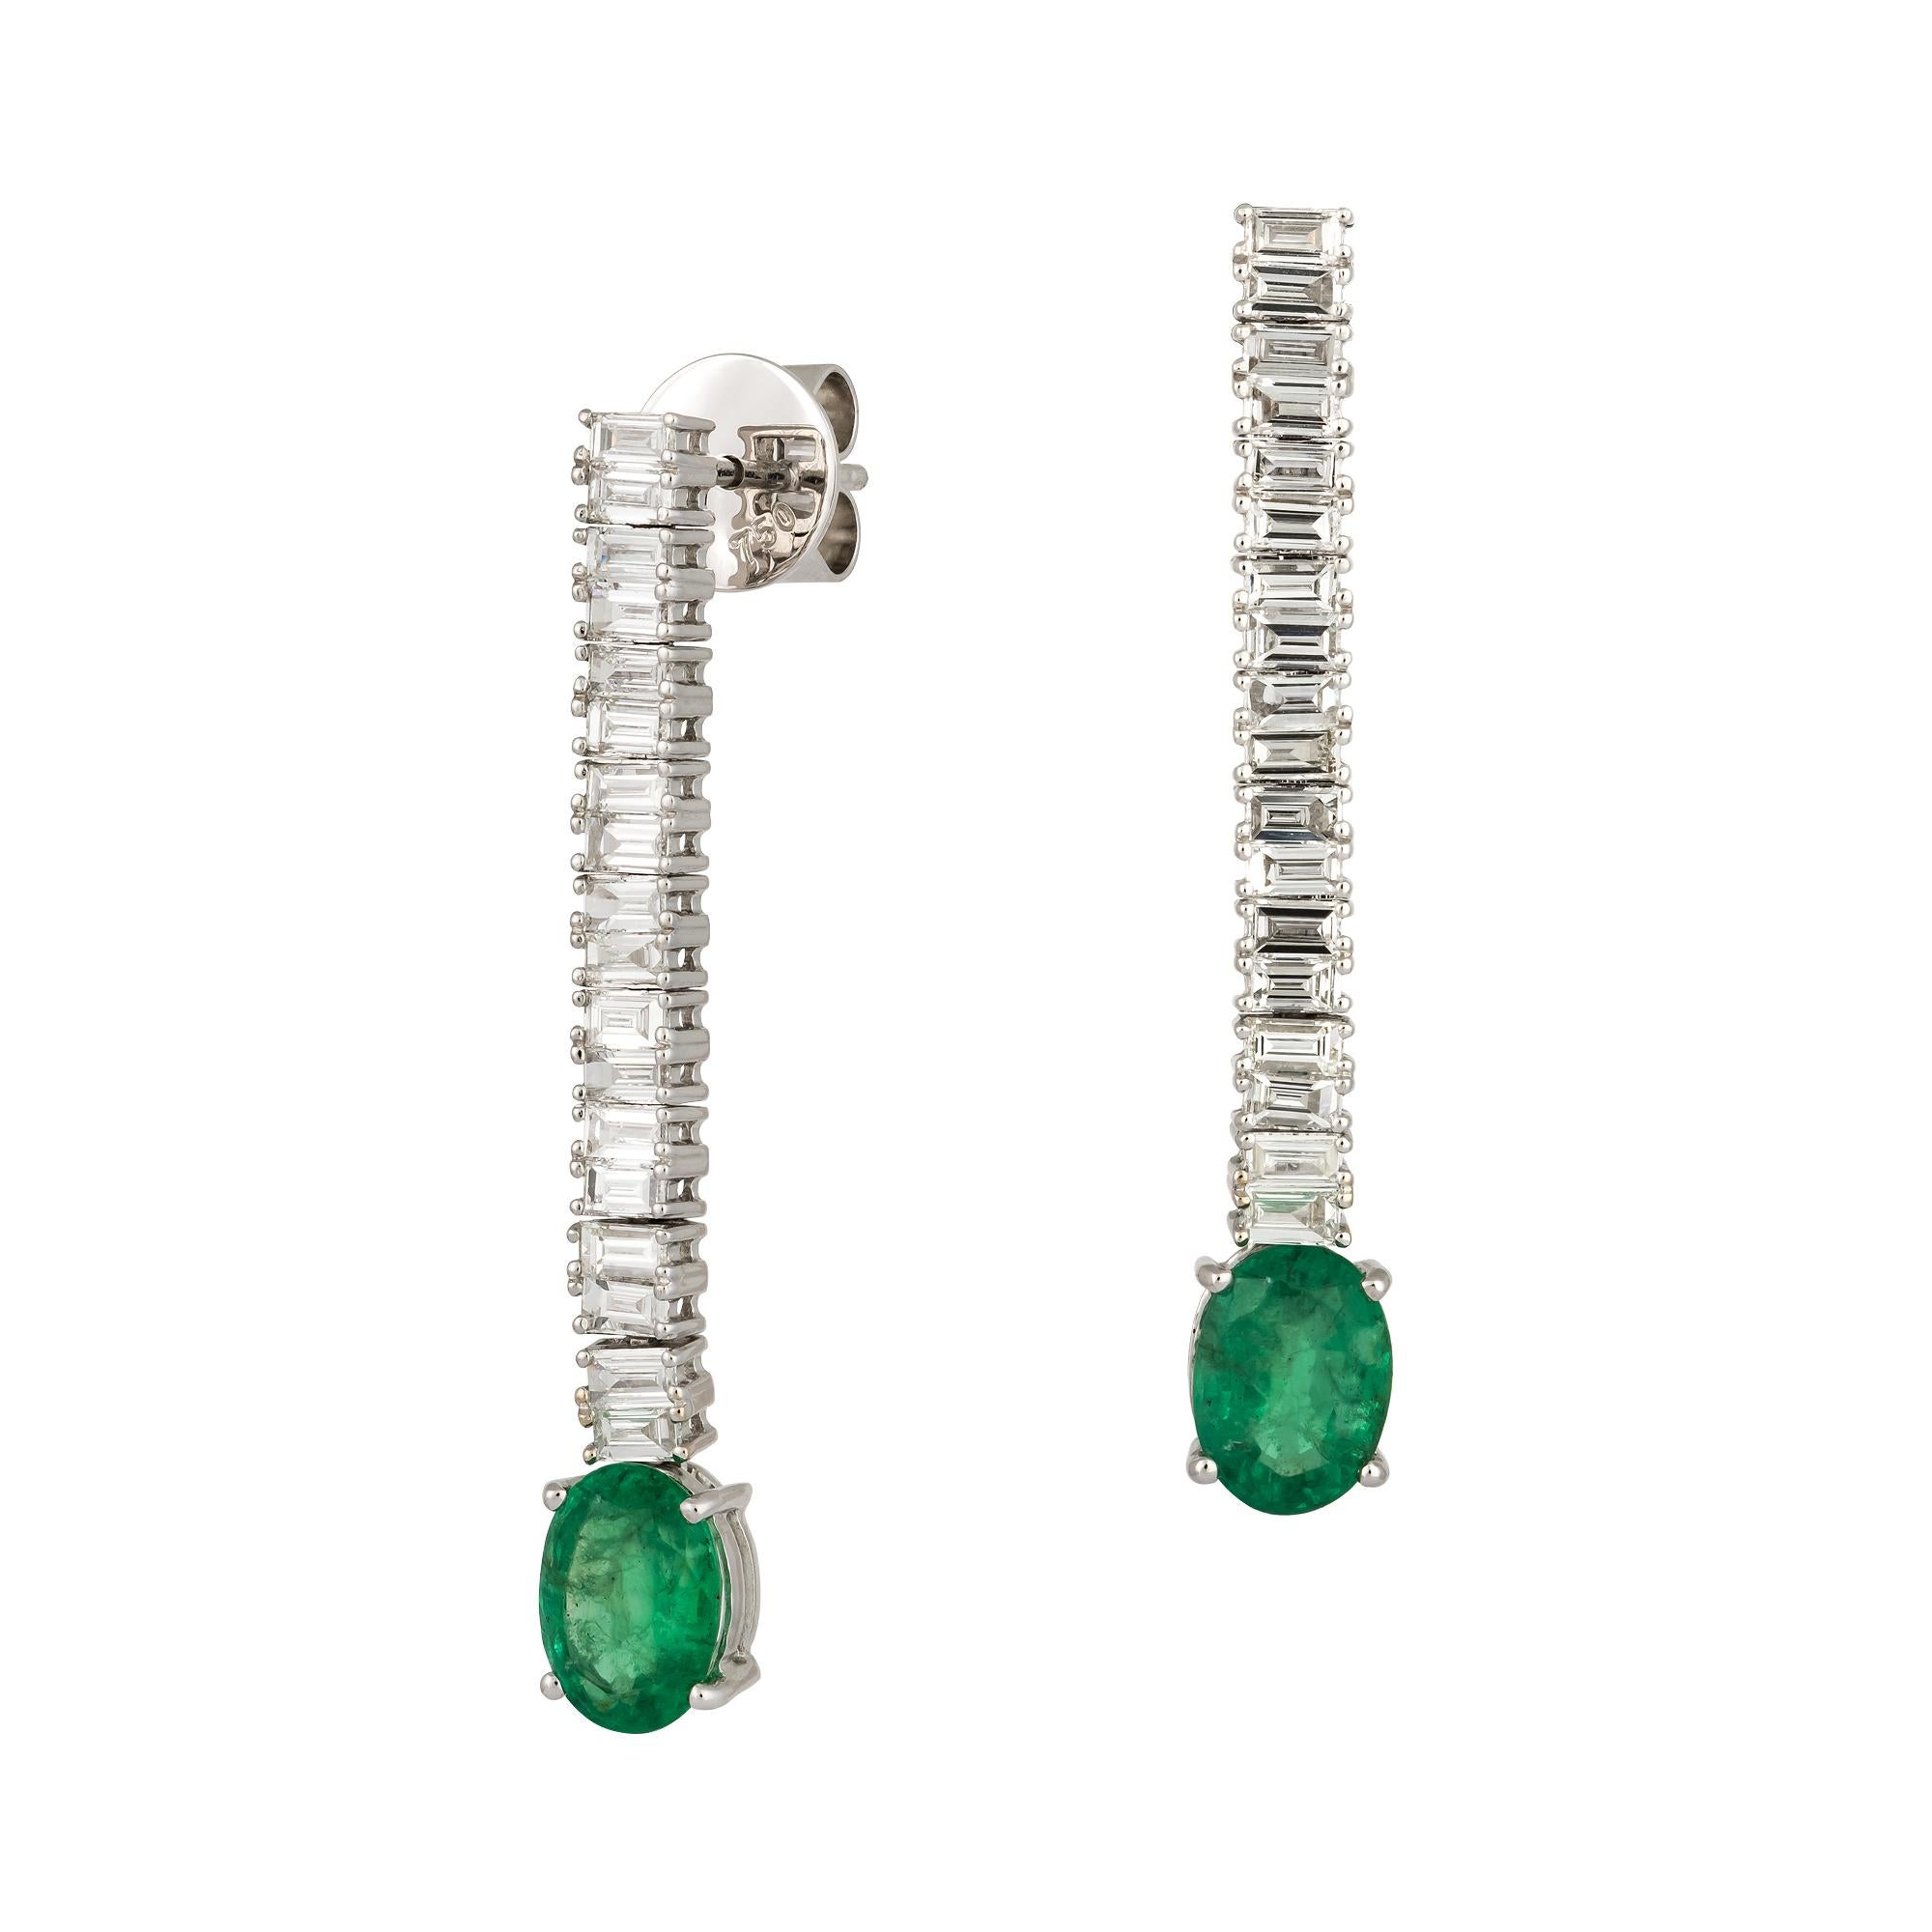 EARRING 18K White Gold Emerald 2.30 Cts/2 Pieces, TB 1.41 Cts/36 Pieces
